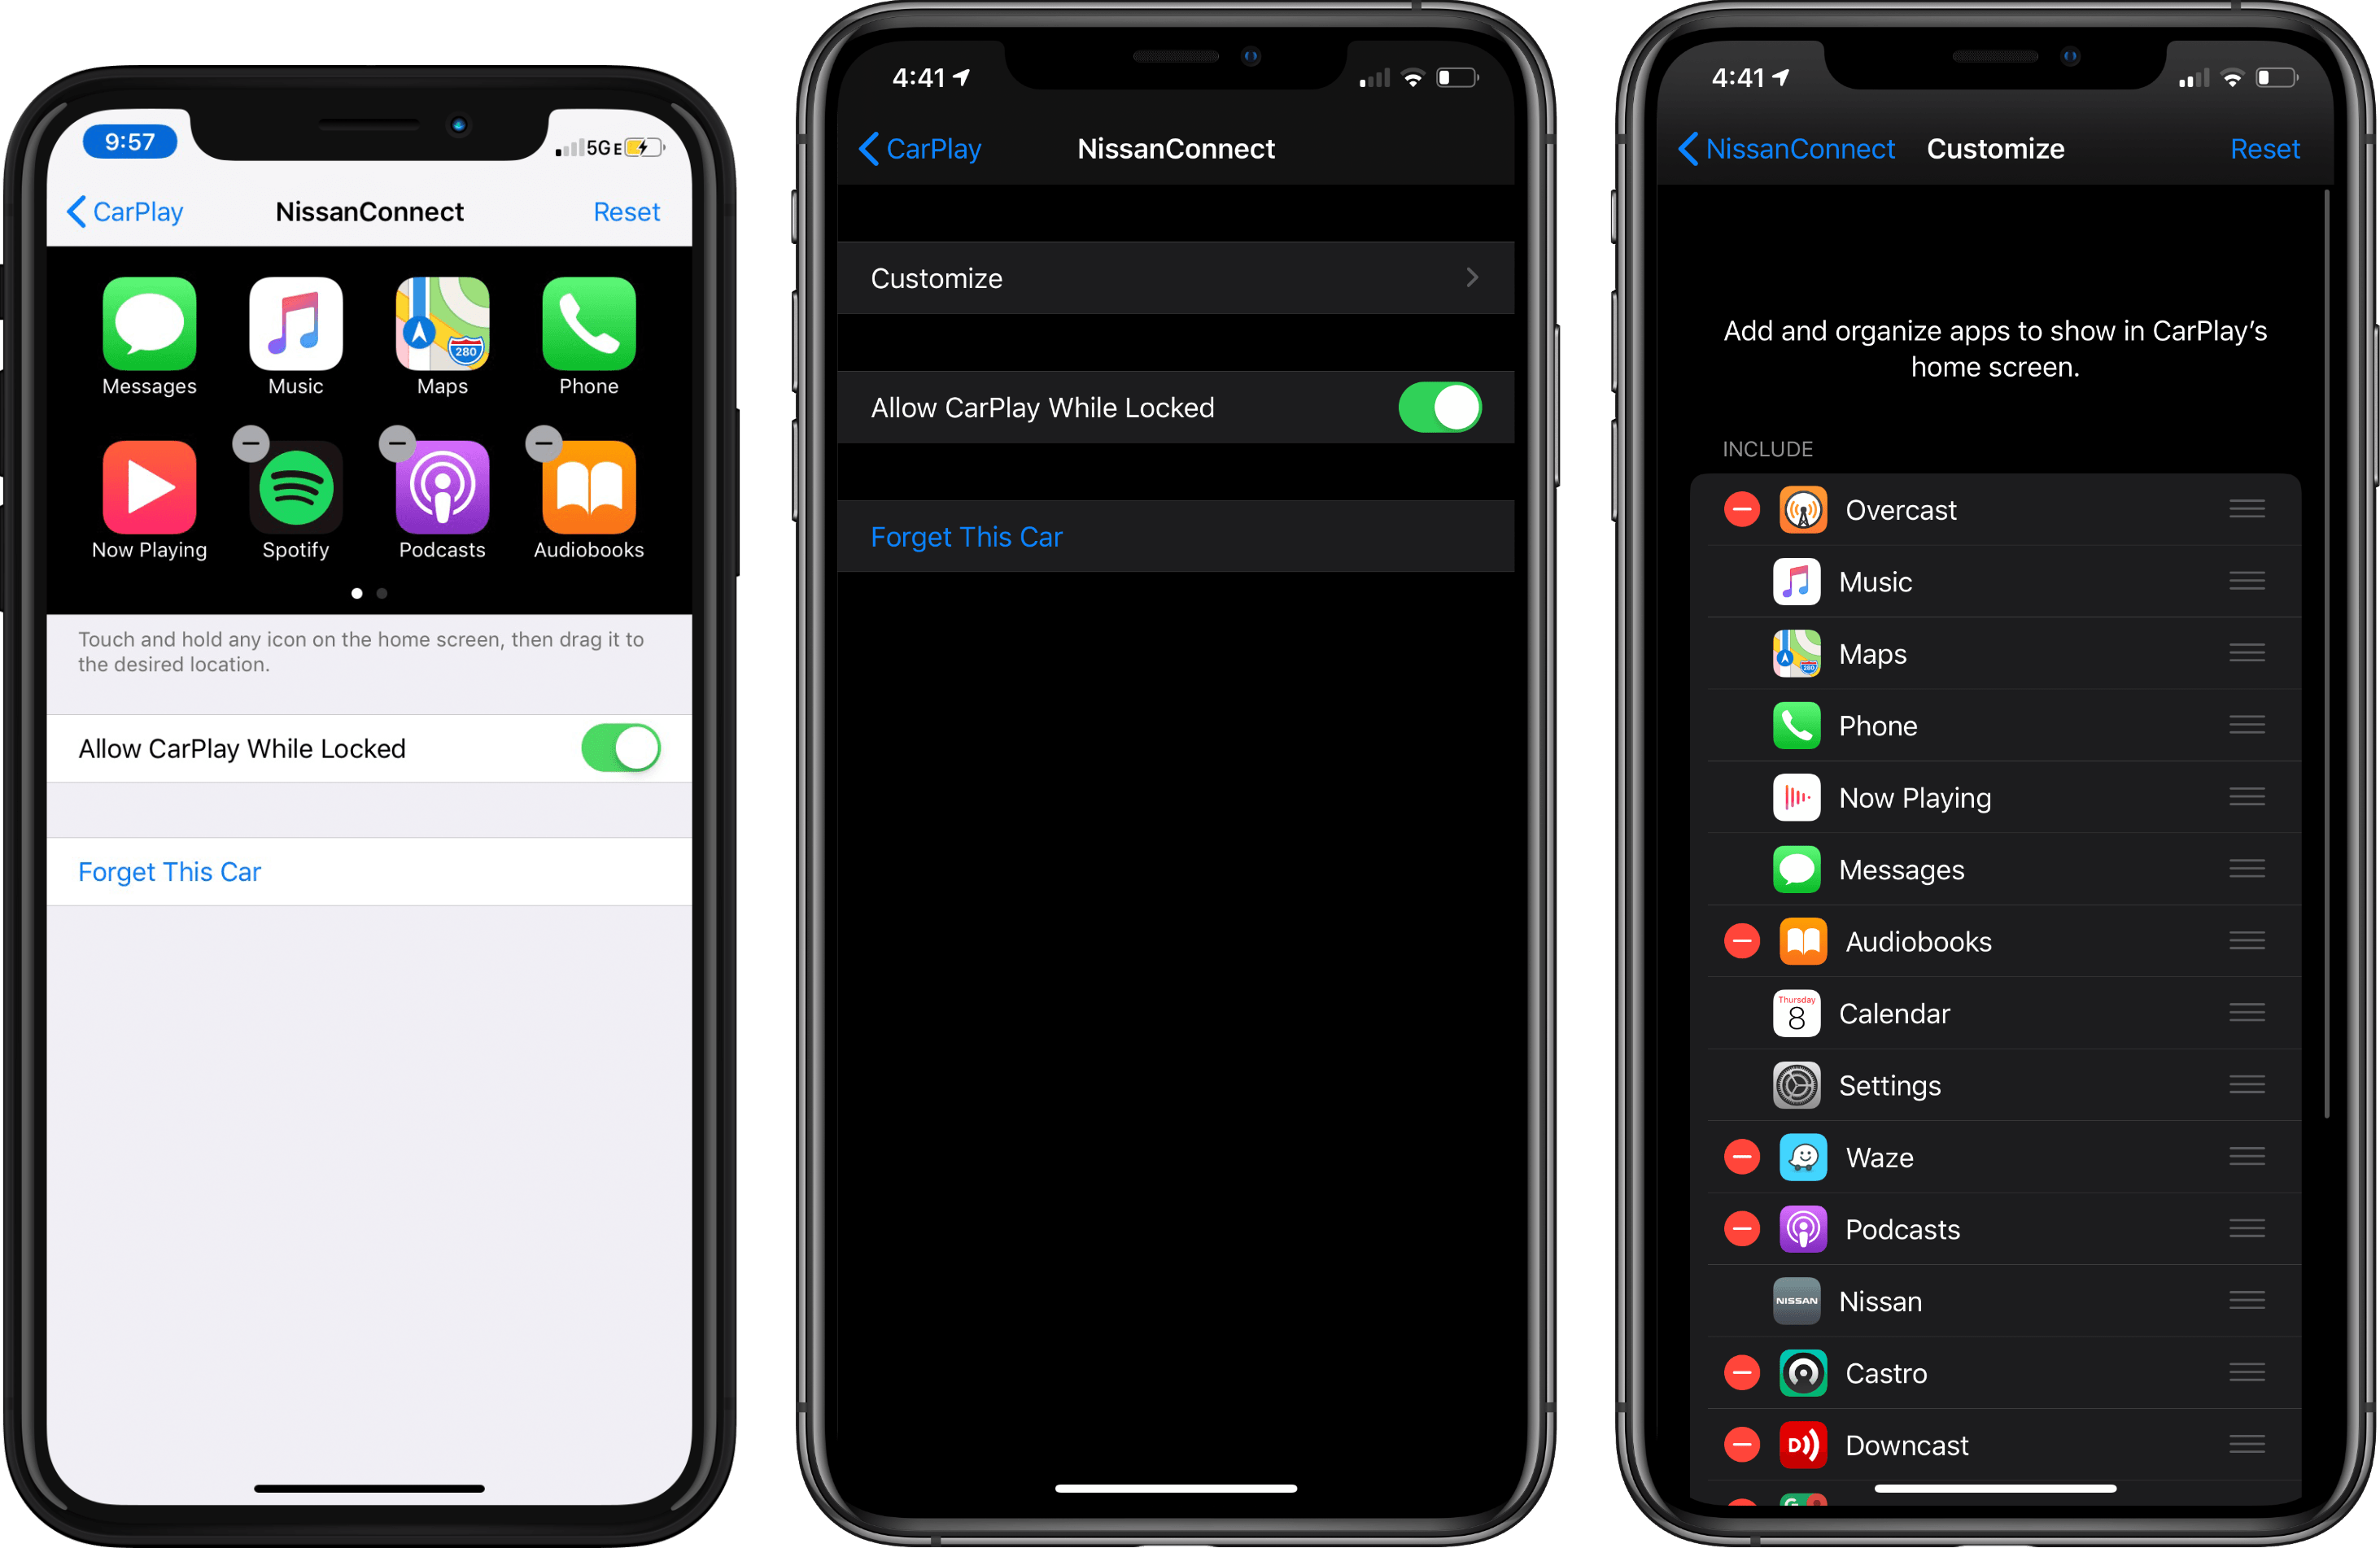 Setting up CarPlay in iOS 12 (left) and iOS 13 (middle and right).